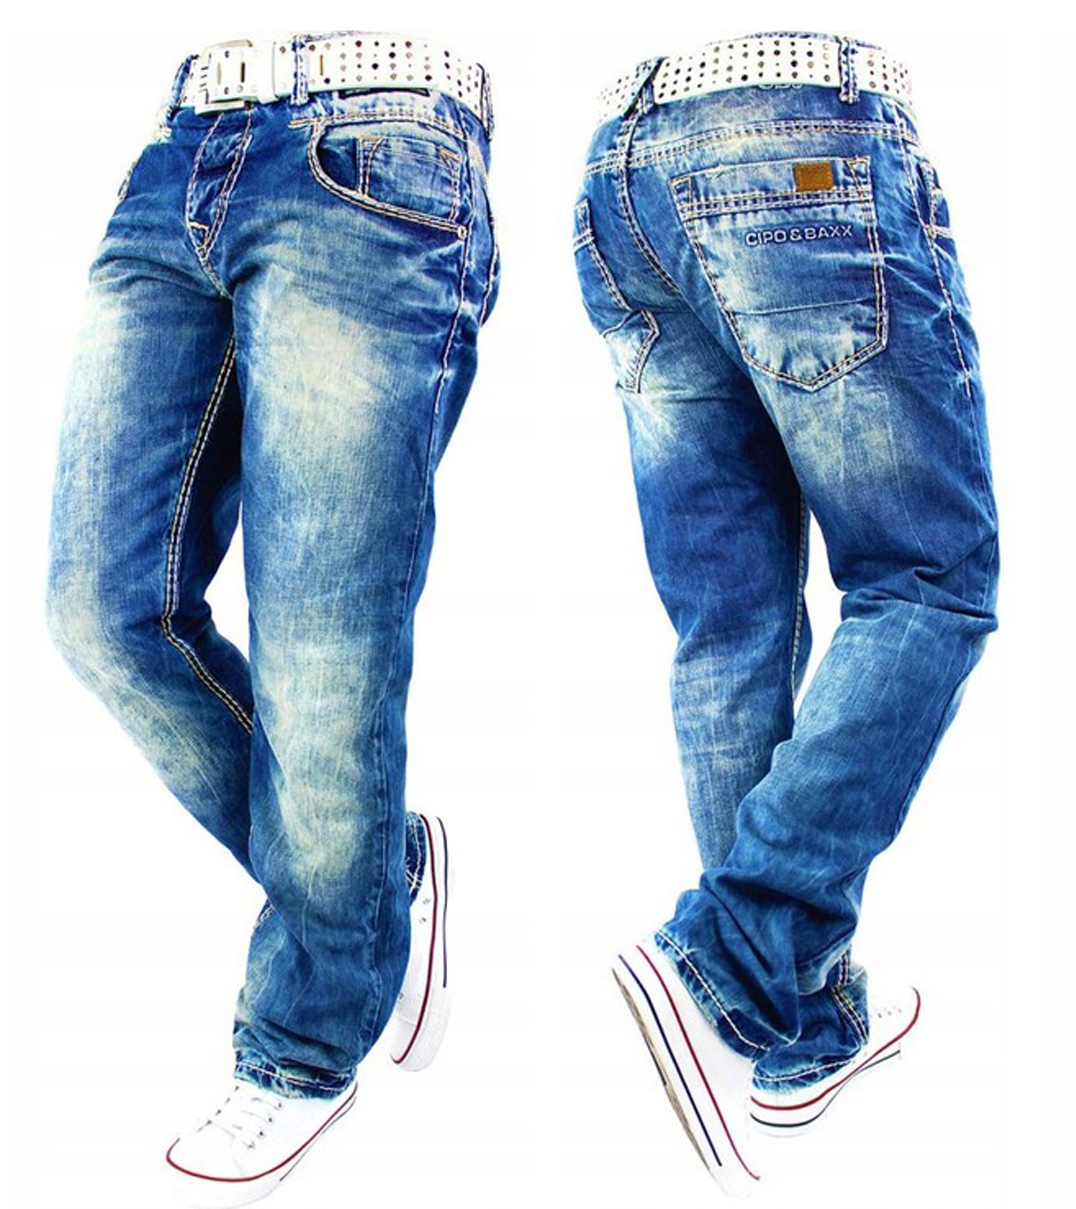 Джинсы wear. Cipo and Baxx Jeans. Мужские джинсы. Джинсы мужские модные. Джинсы брюки мужские.